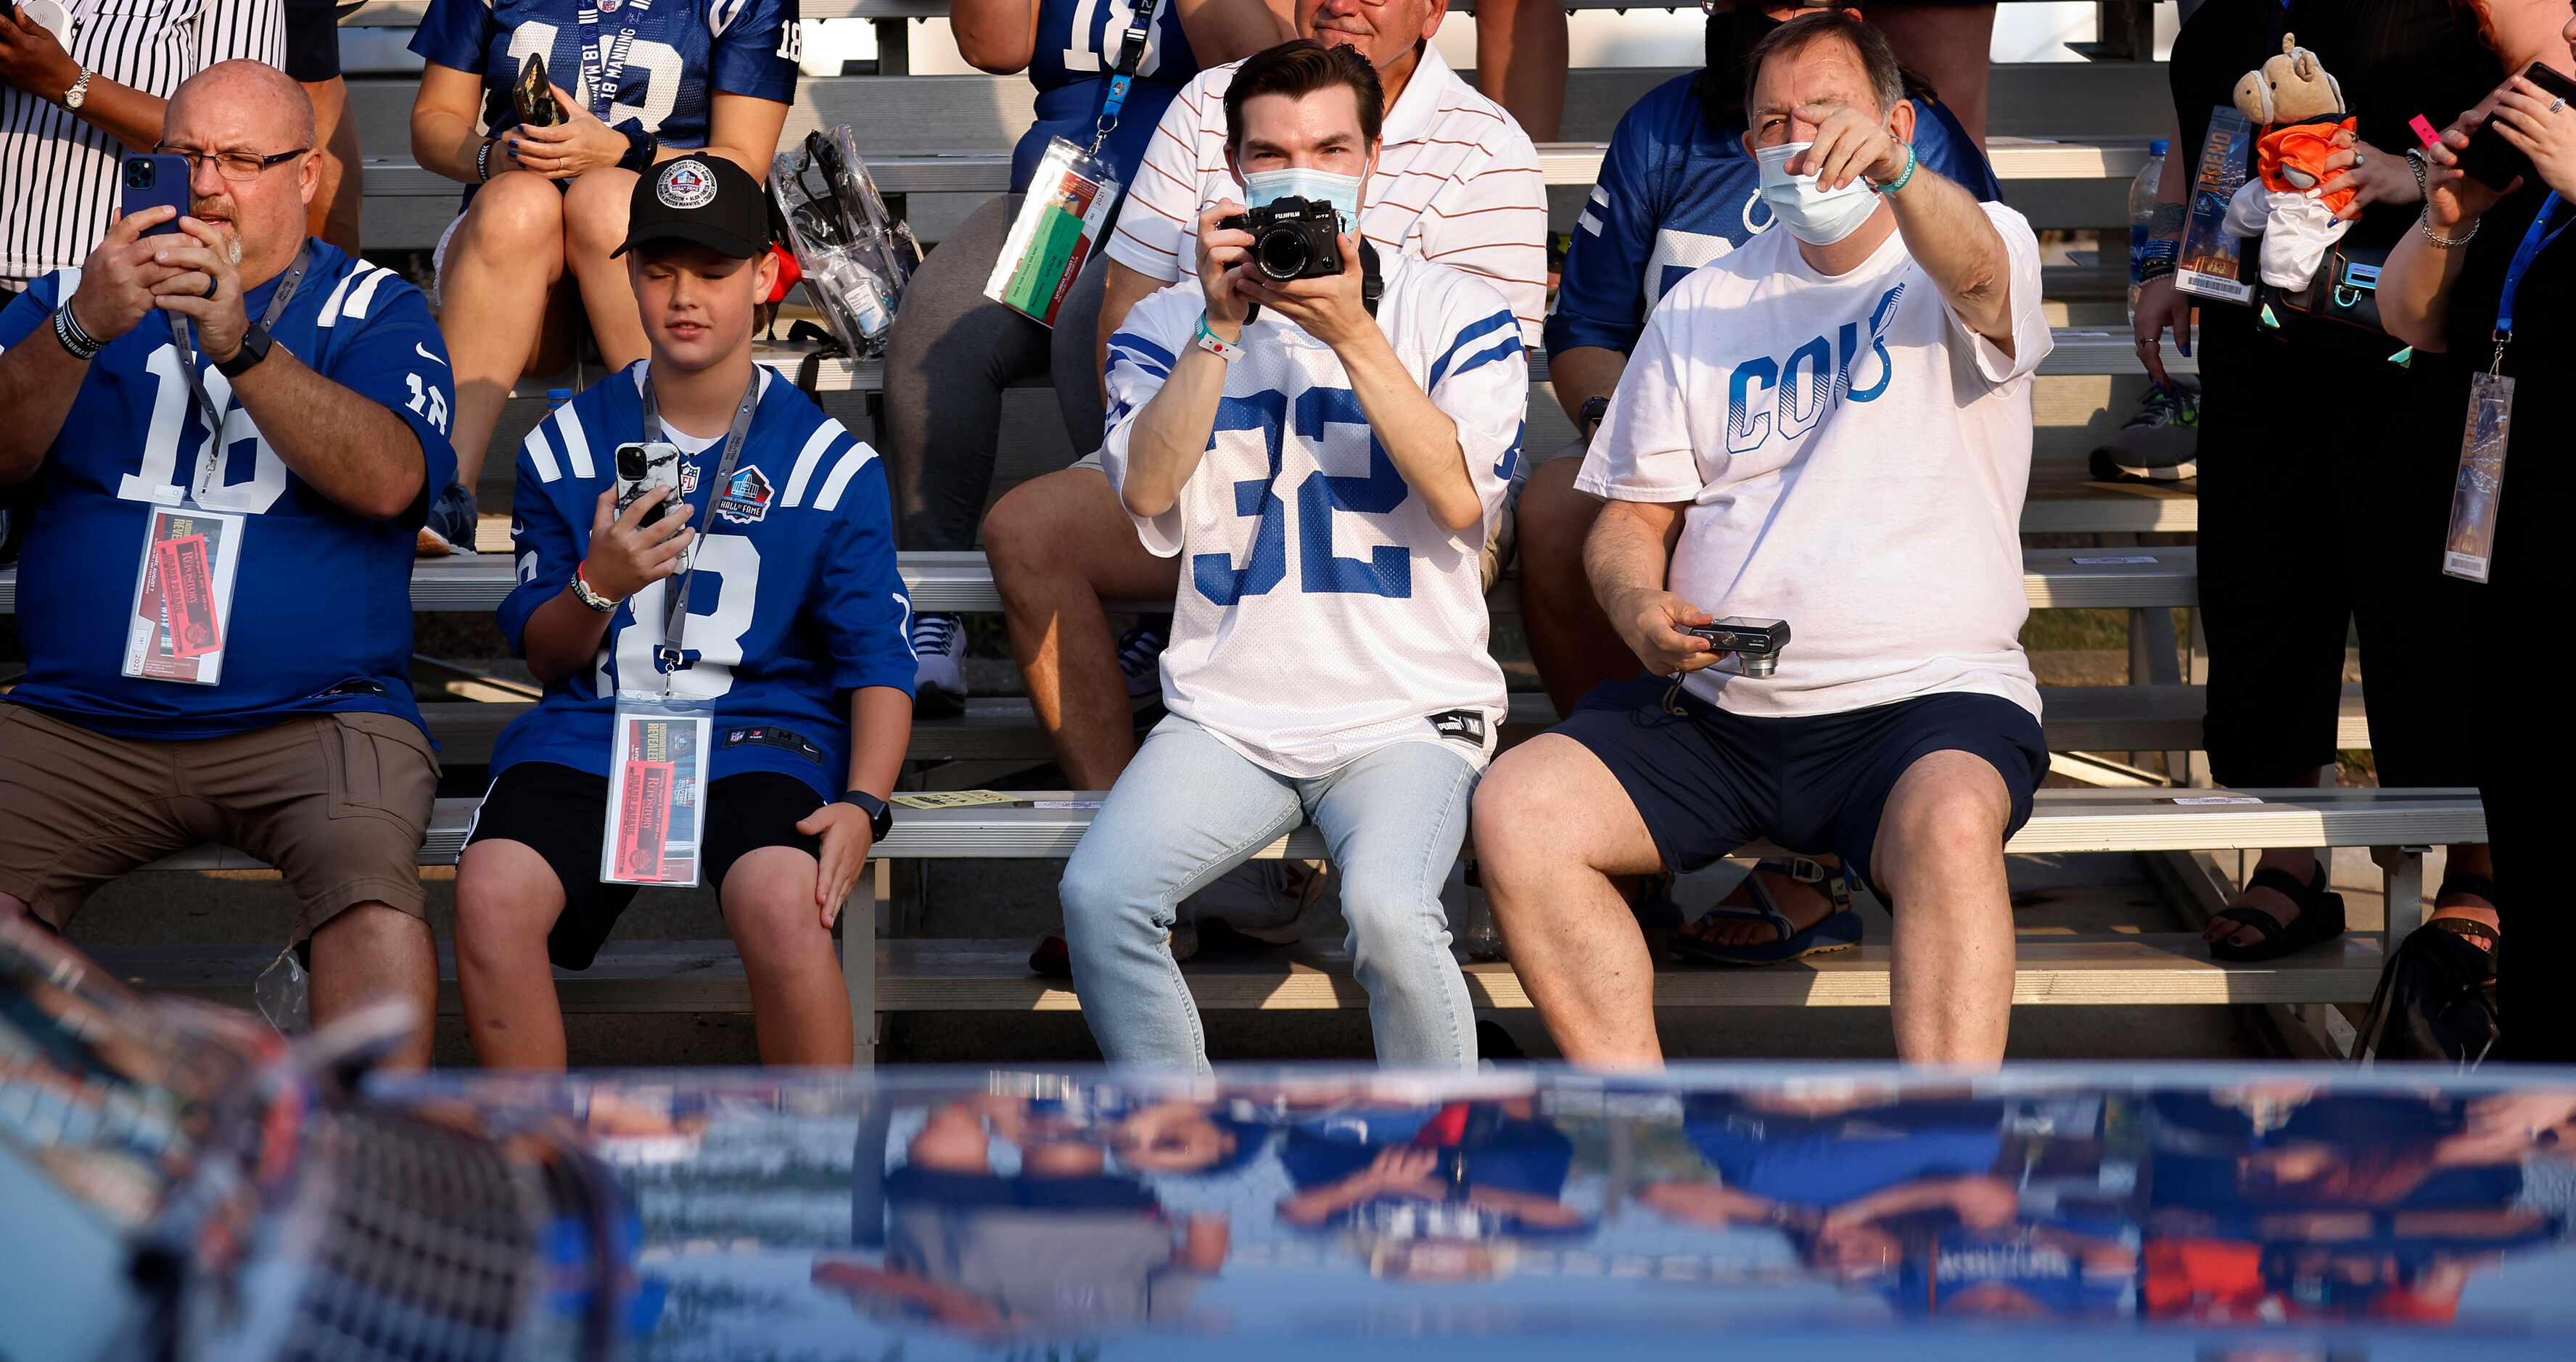 Indianapolis Colts fans photograph a Pro Football Hall of Fame member who passes in the...